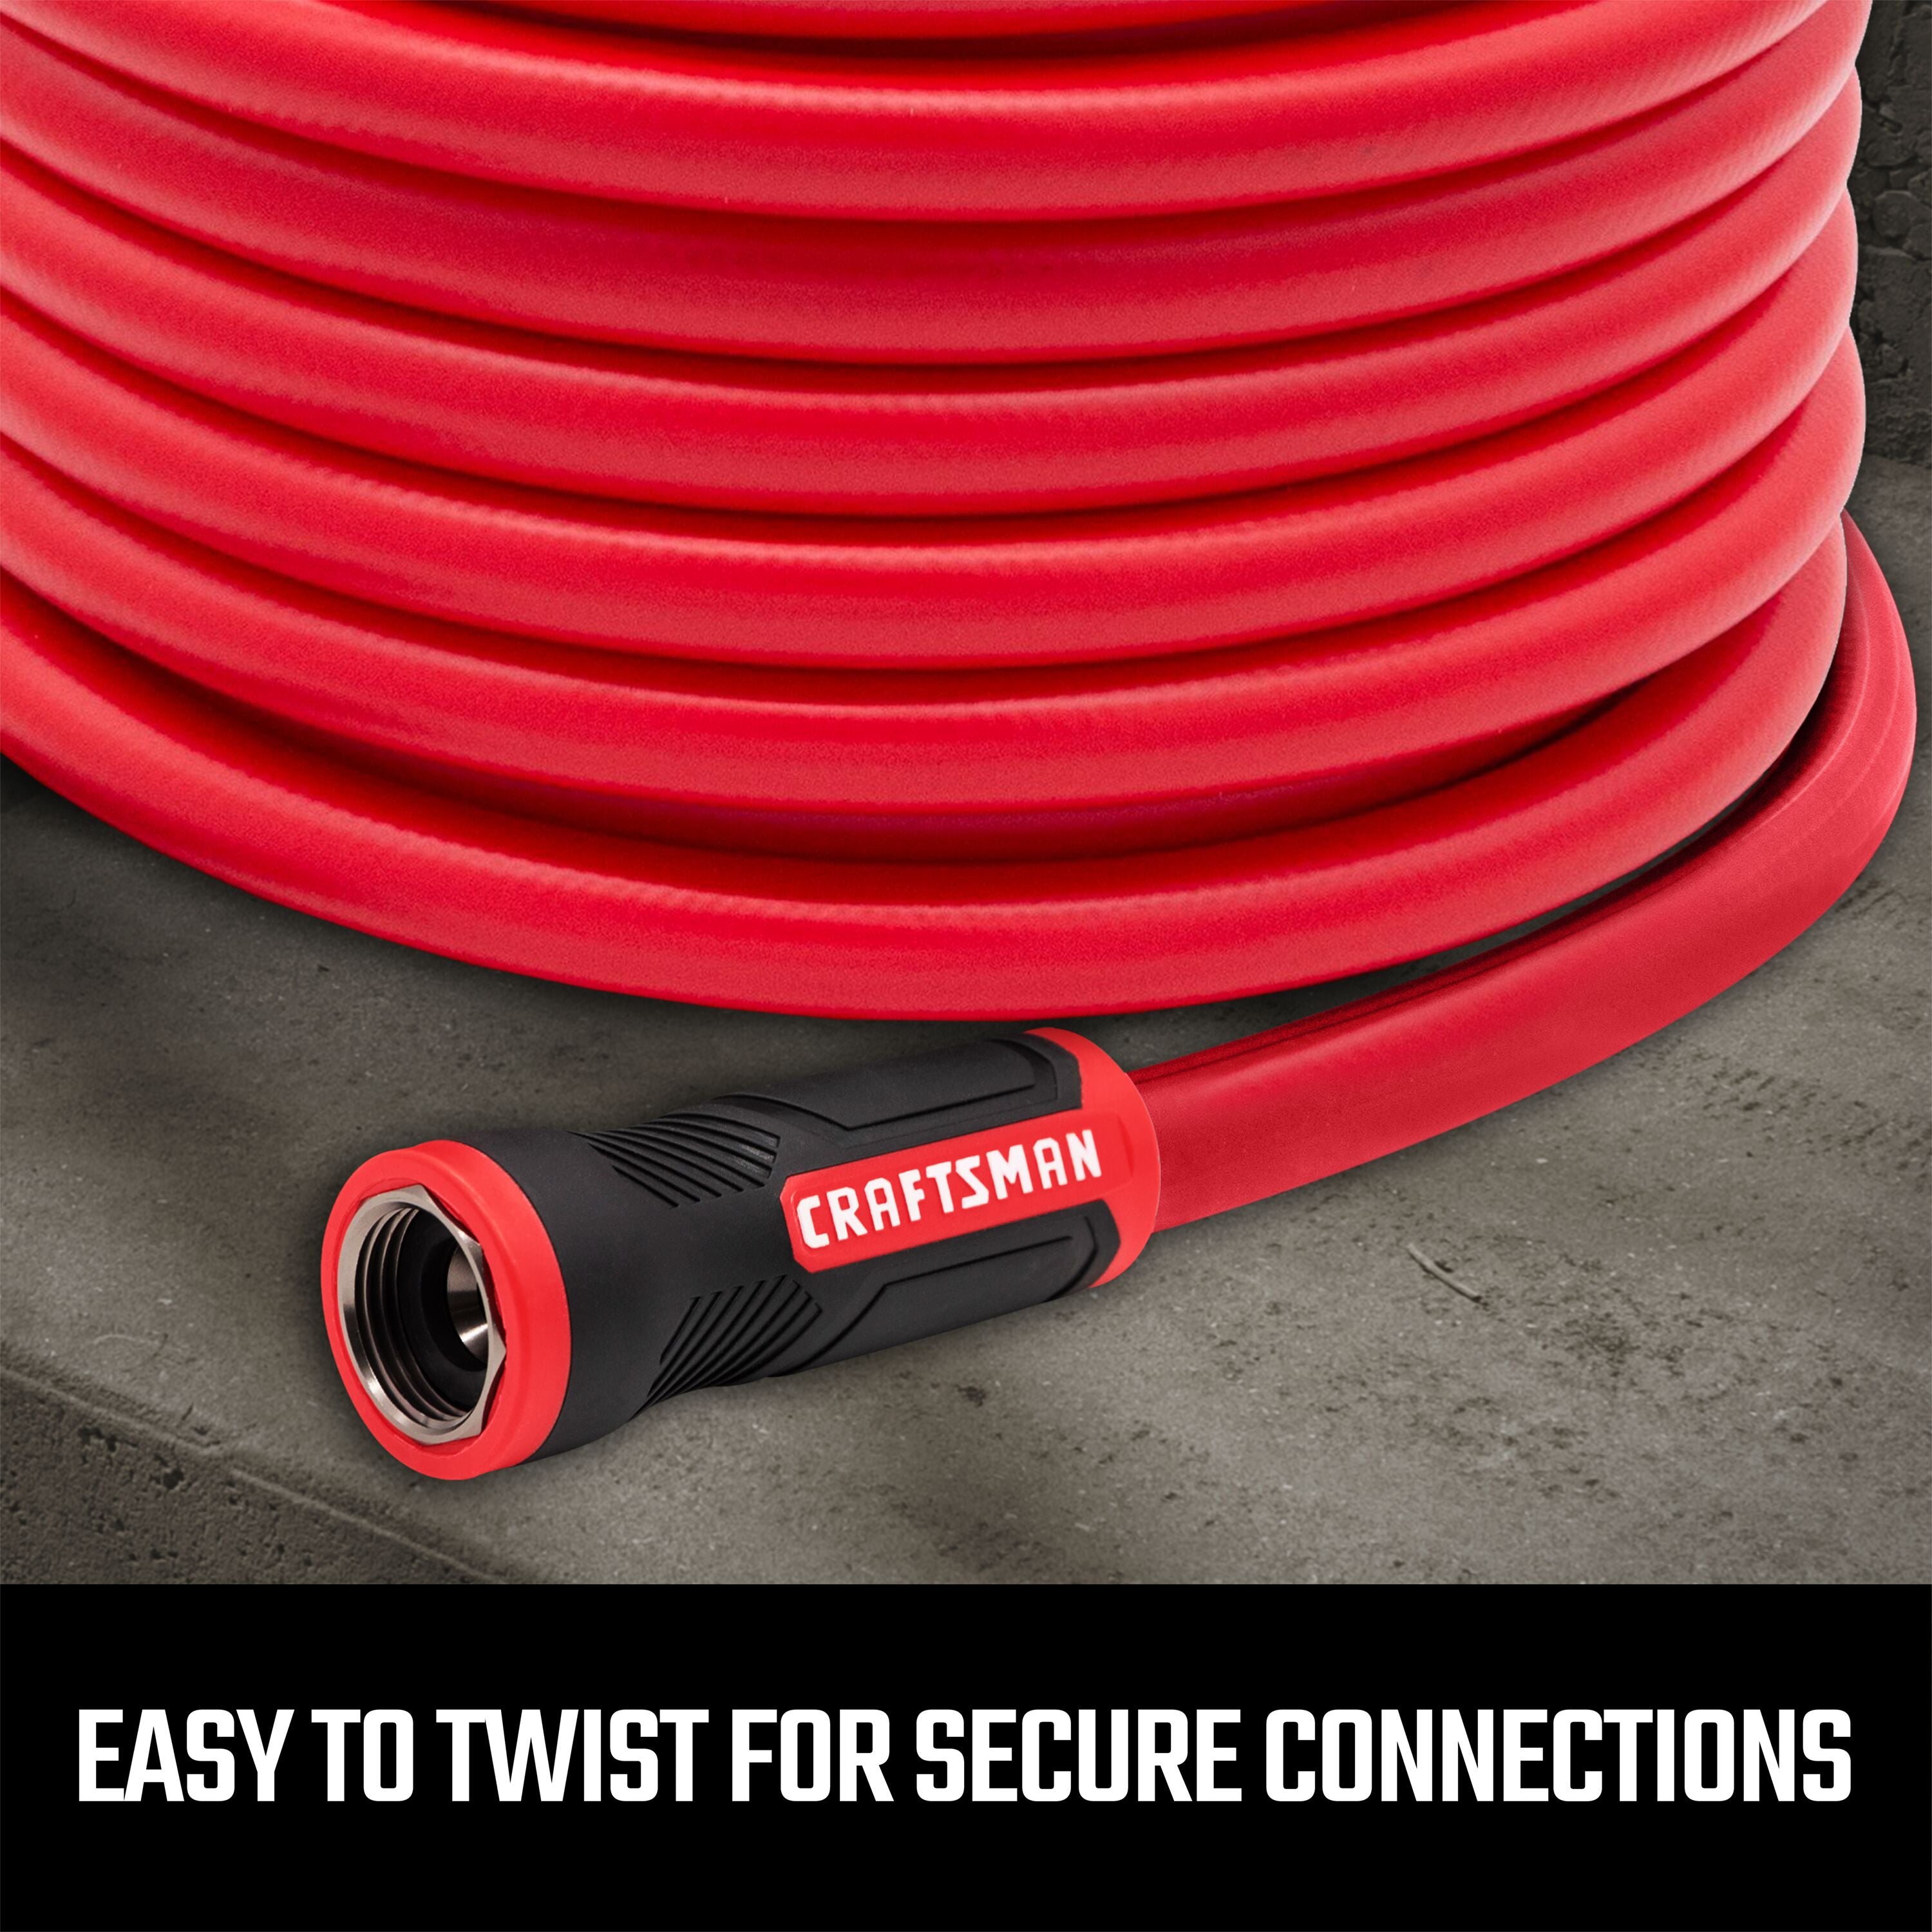 Red and black 75-foot by 5/8 inch professional-grade hot water hose featuring easy twist couplings for secure connections.